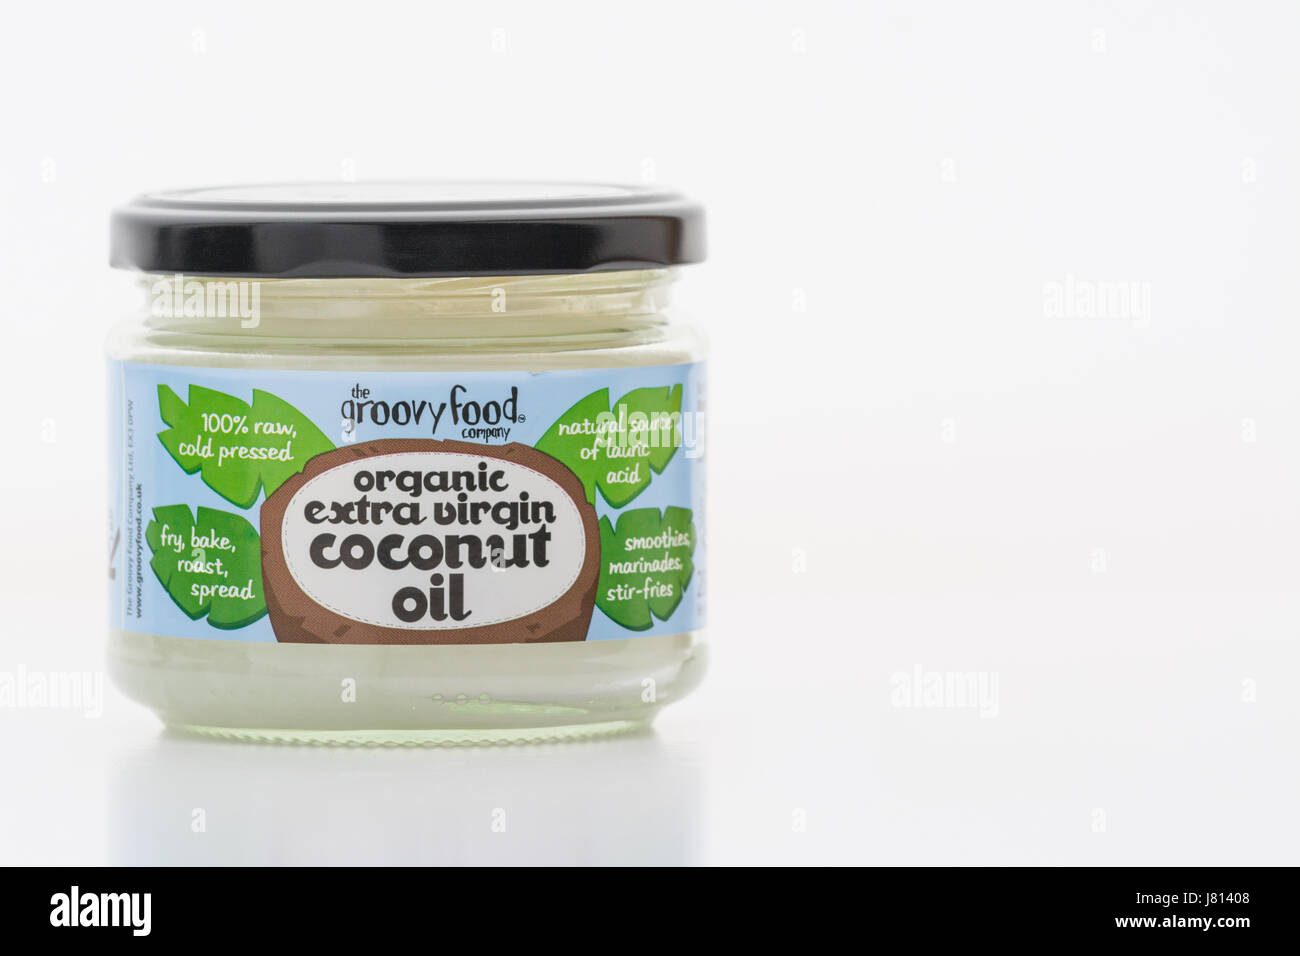 Coconut Oil - organic extra virgin - by the groovy food company Stock Photo